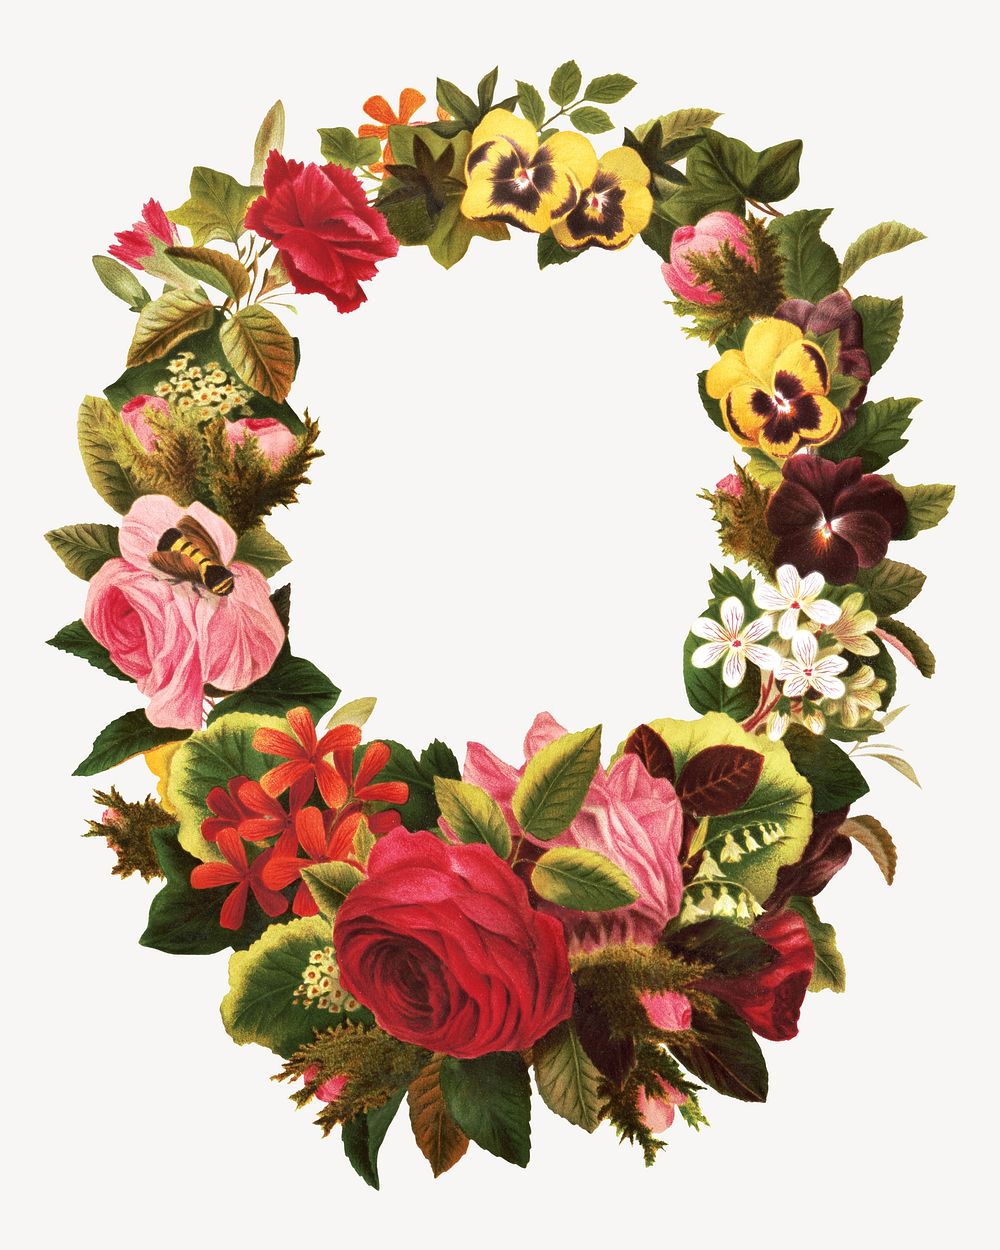 Vintage wreath chromolithograph art. Remixed by rawpixel. 